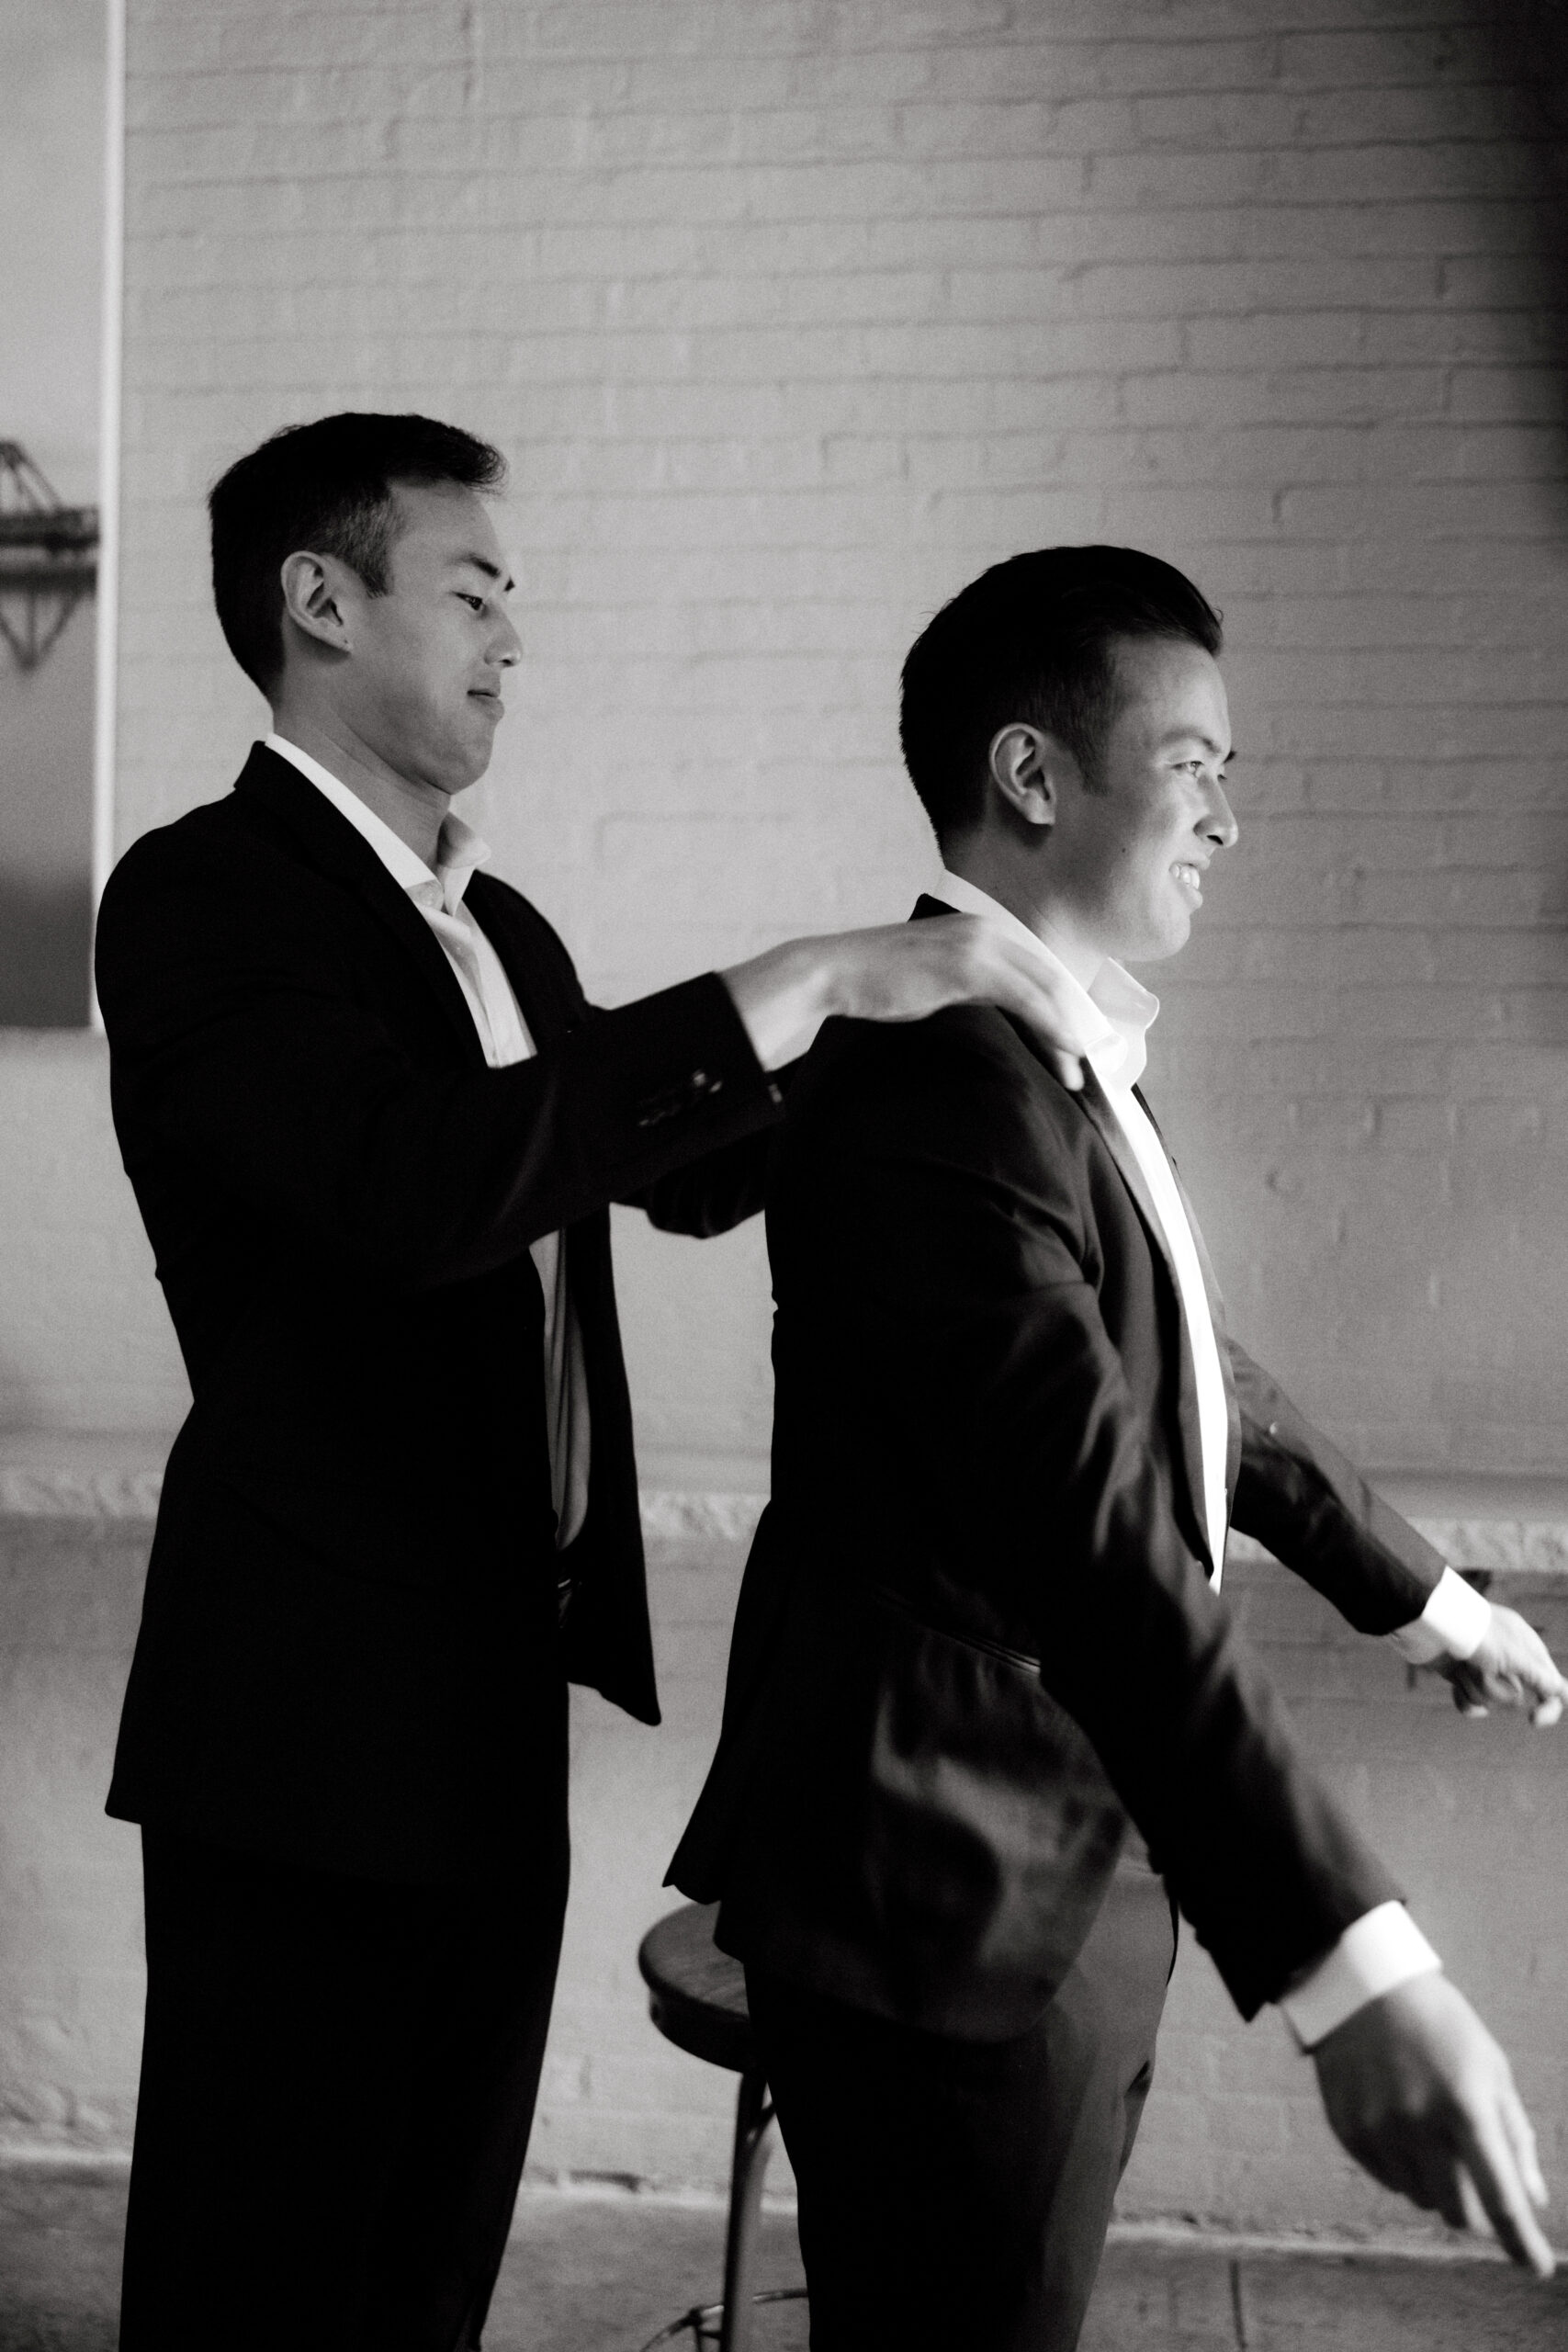 The groom is excitedly getting ready for the wedding. A candid moment captured by Jenny Fu